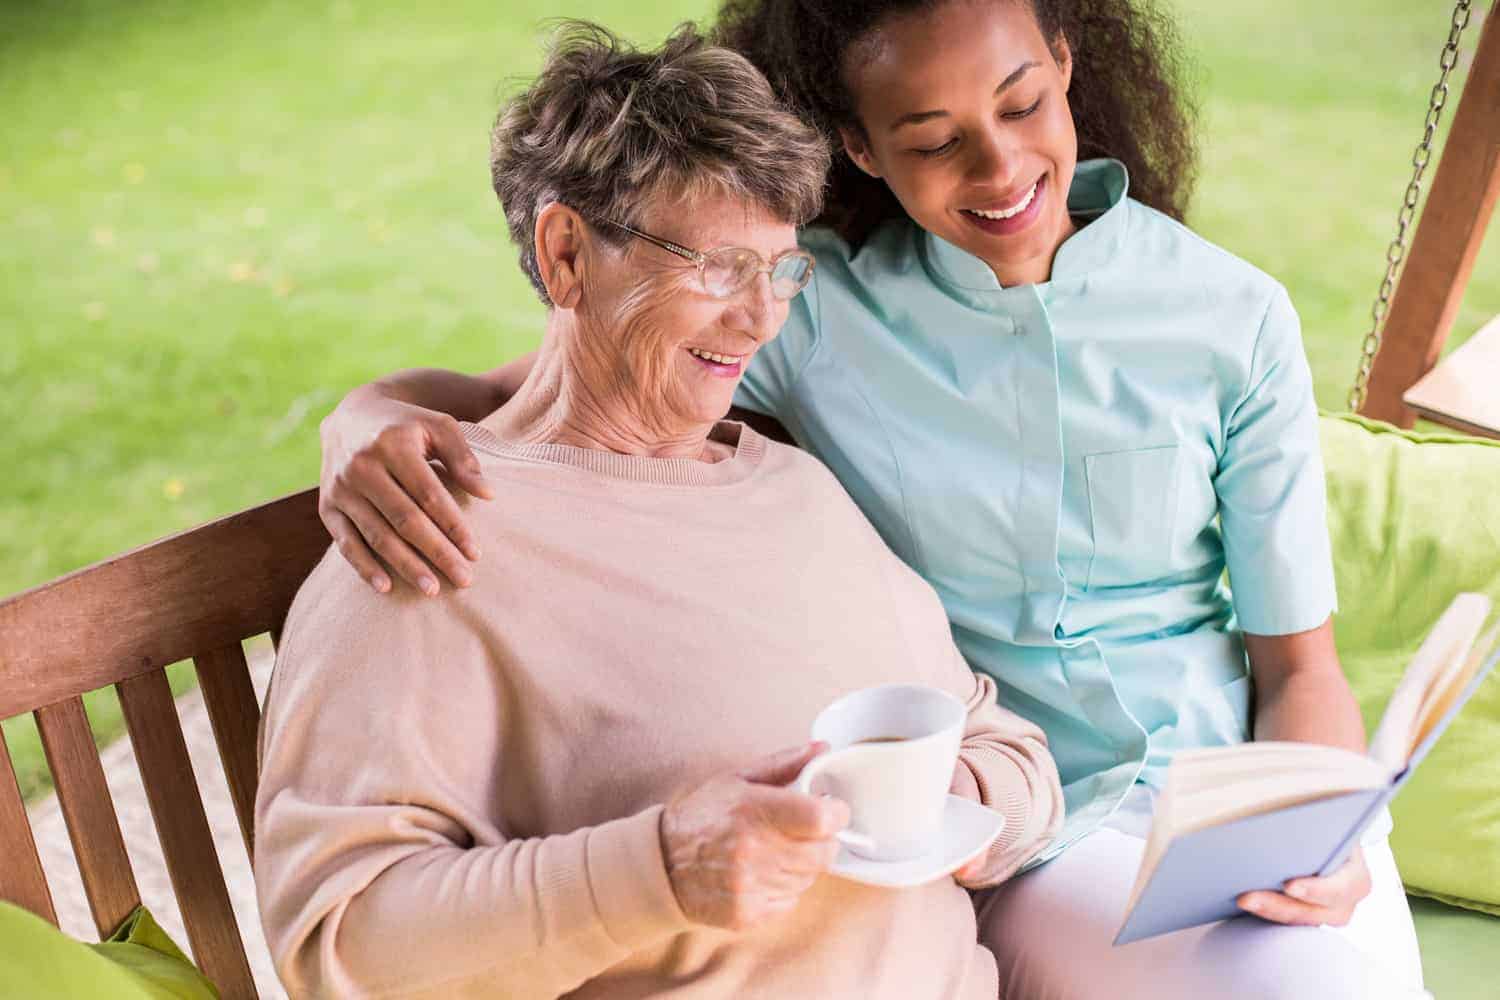 Sharing stories and warm smiles: a young carer enjoys a book with an elderly woman on a relaxing day, as they bond over a cup of tea on a cozy garden swing.